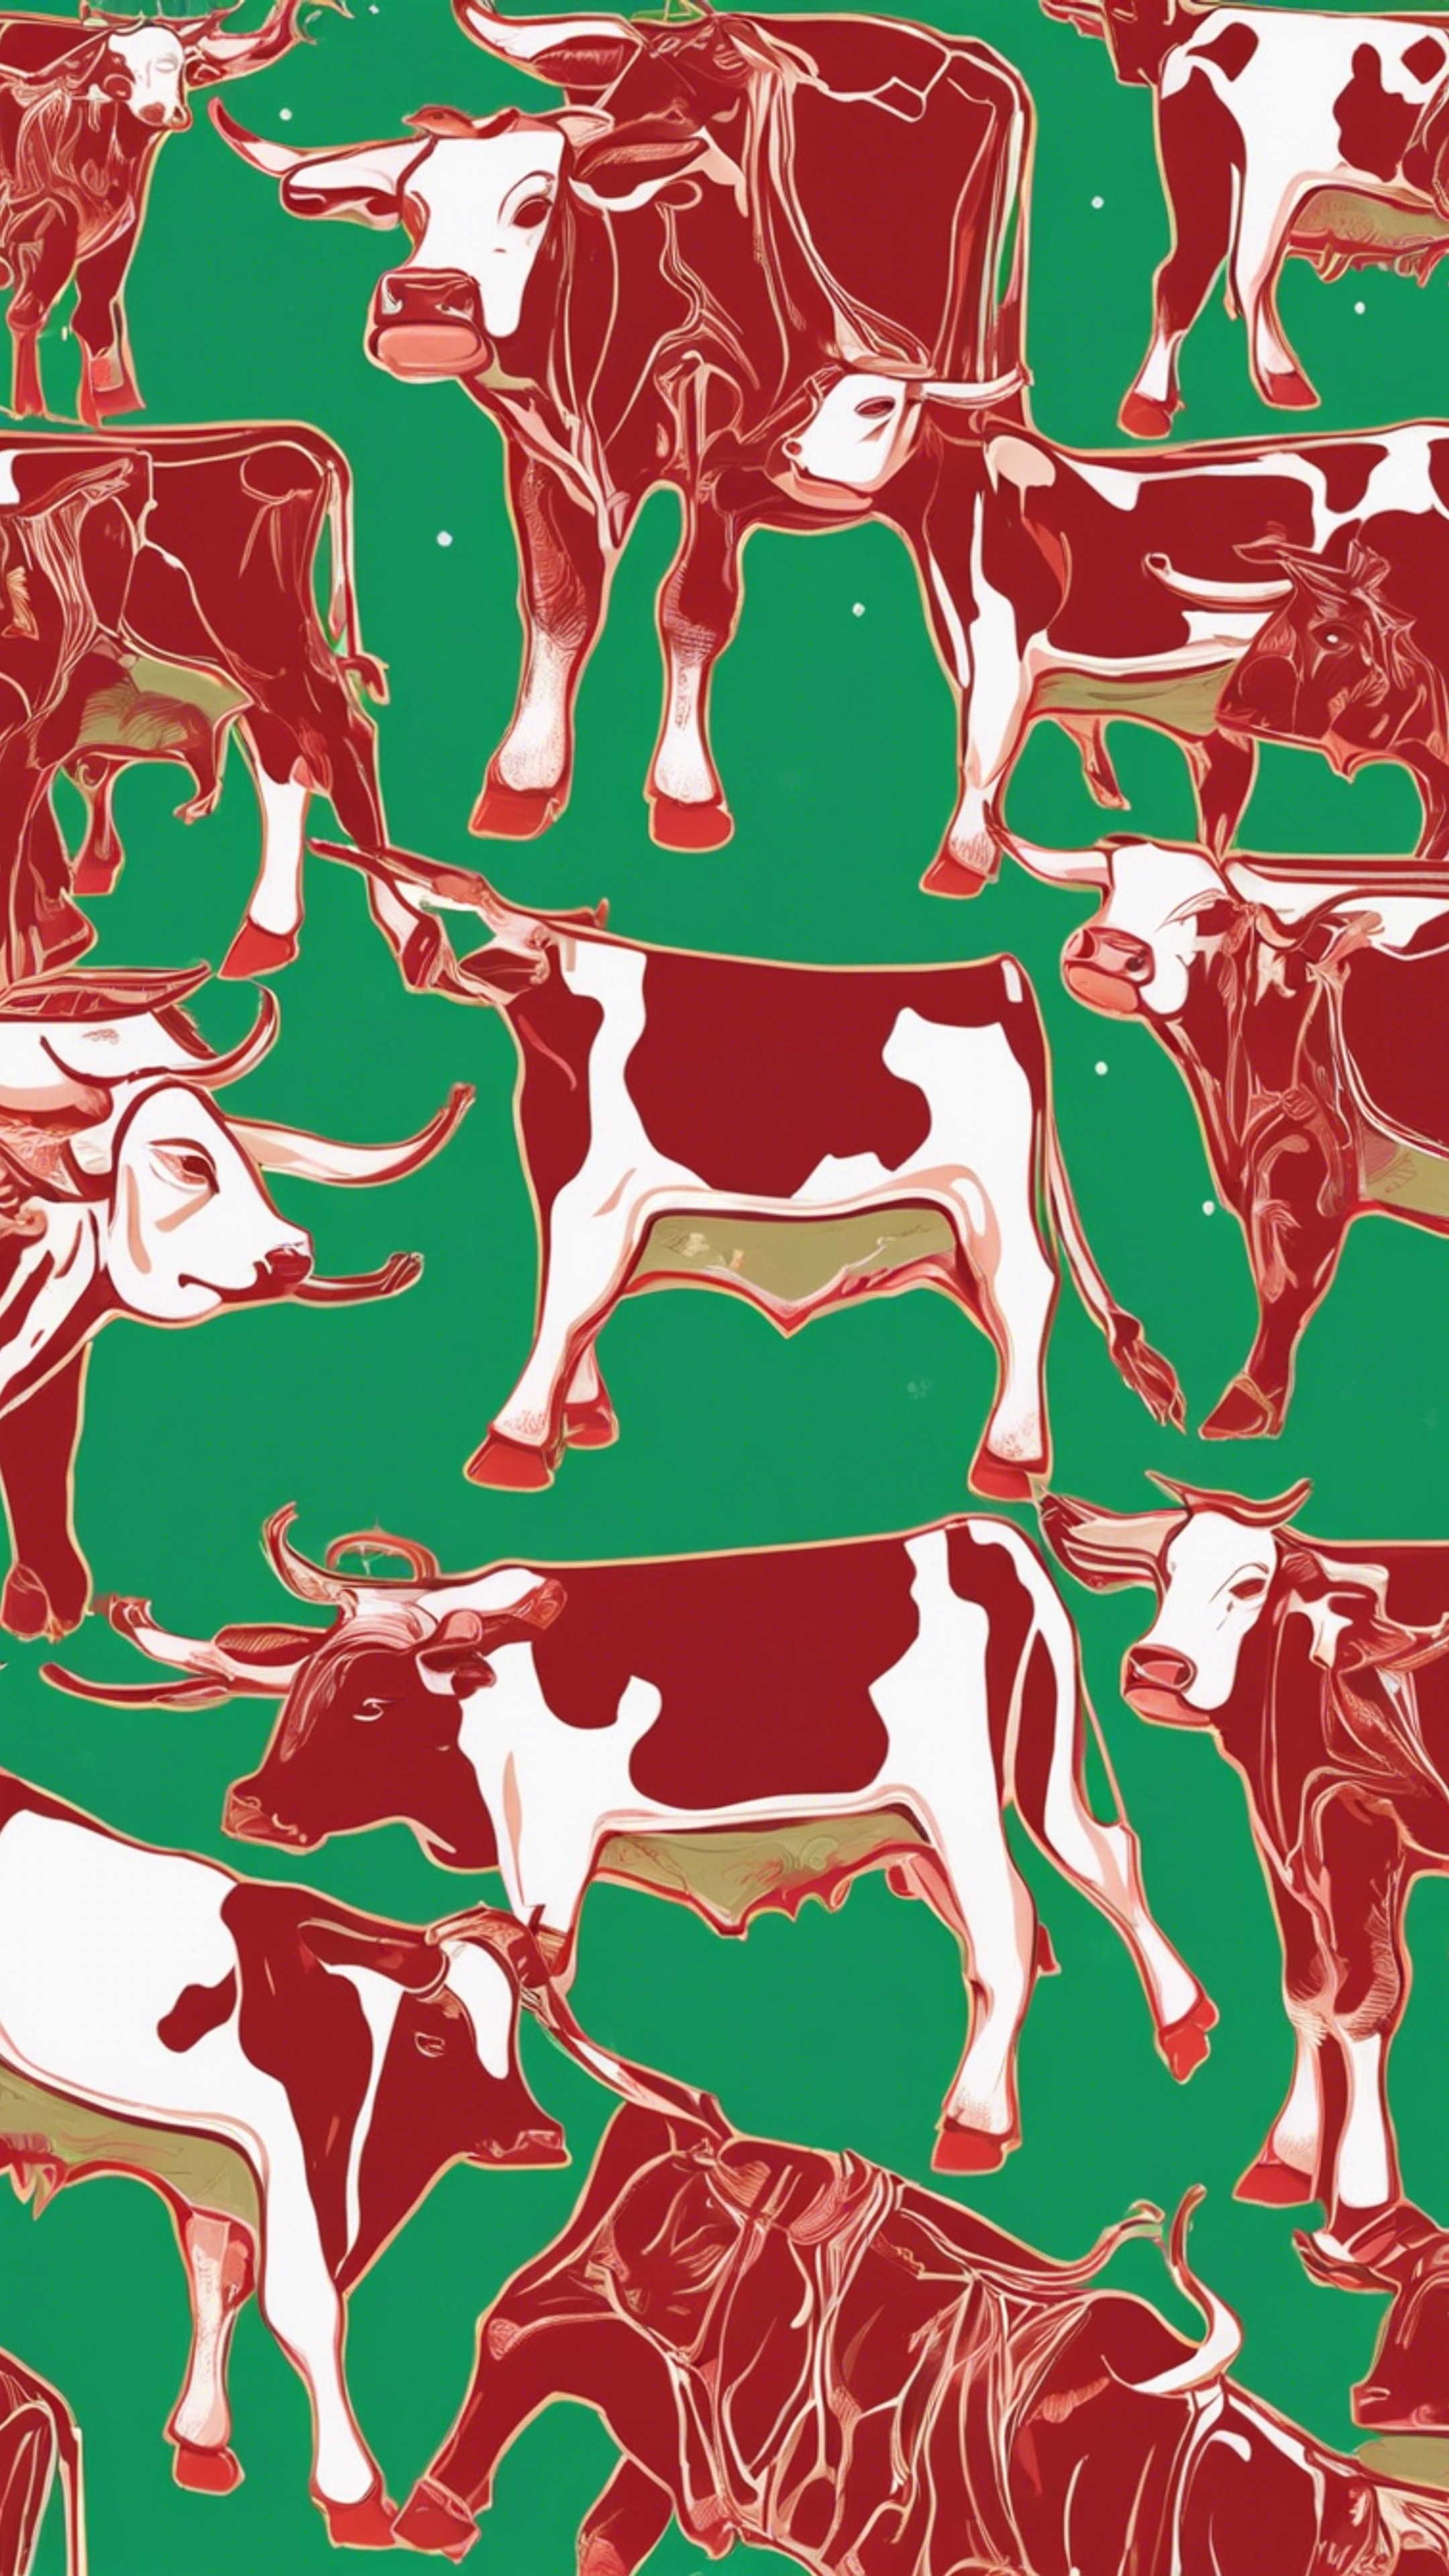 An abstract art featuring earthy green and vibrant red cow patterns. Hình nền[bce8b500f11040f088c2]